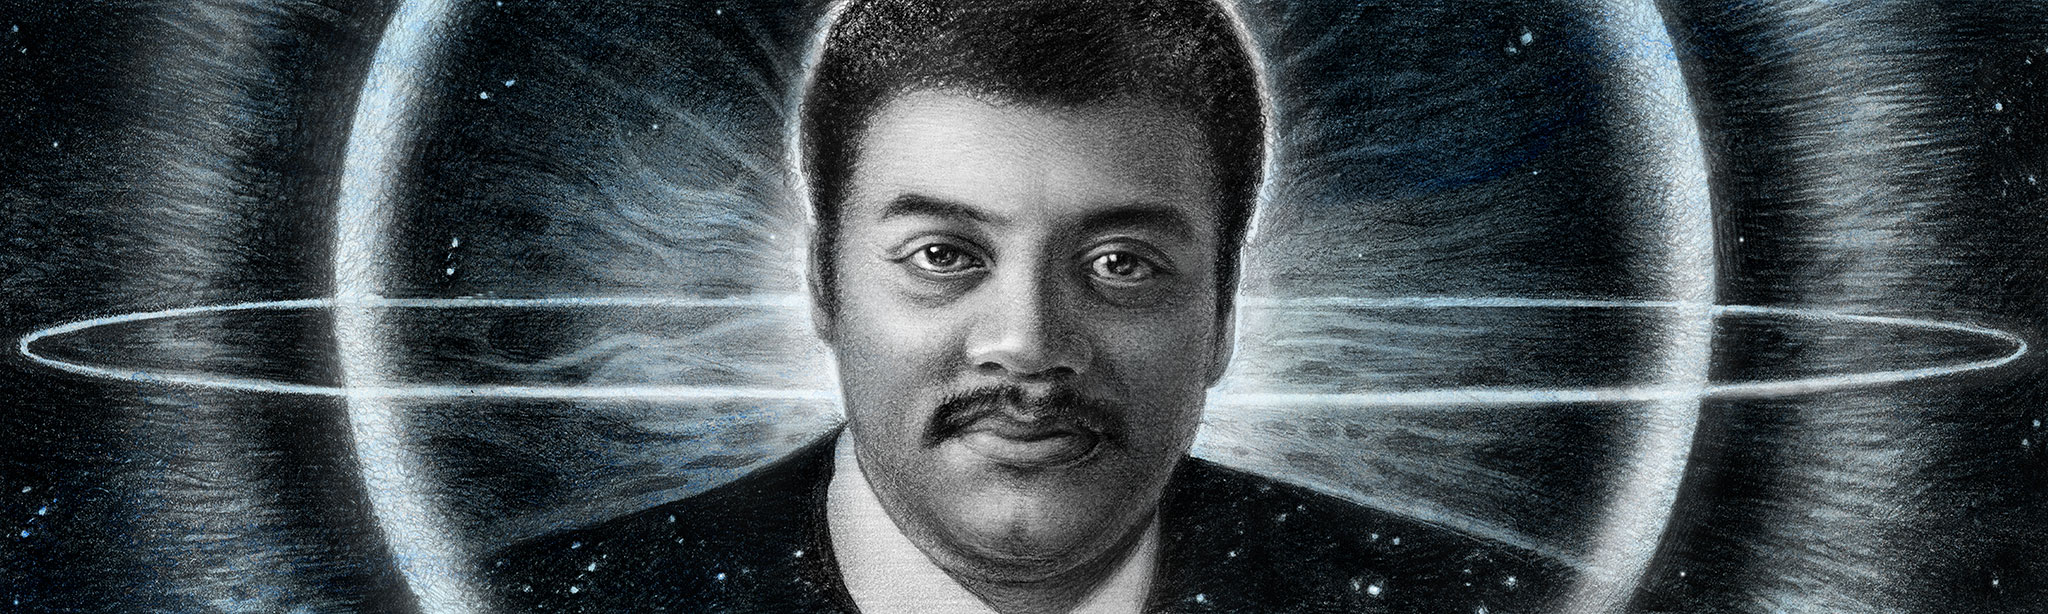 Reflections on the Color of My Skin : Neil deGrasse Tyson